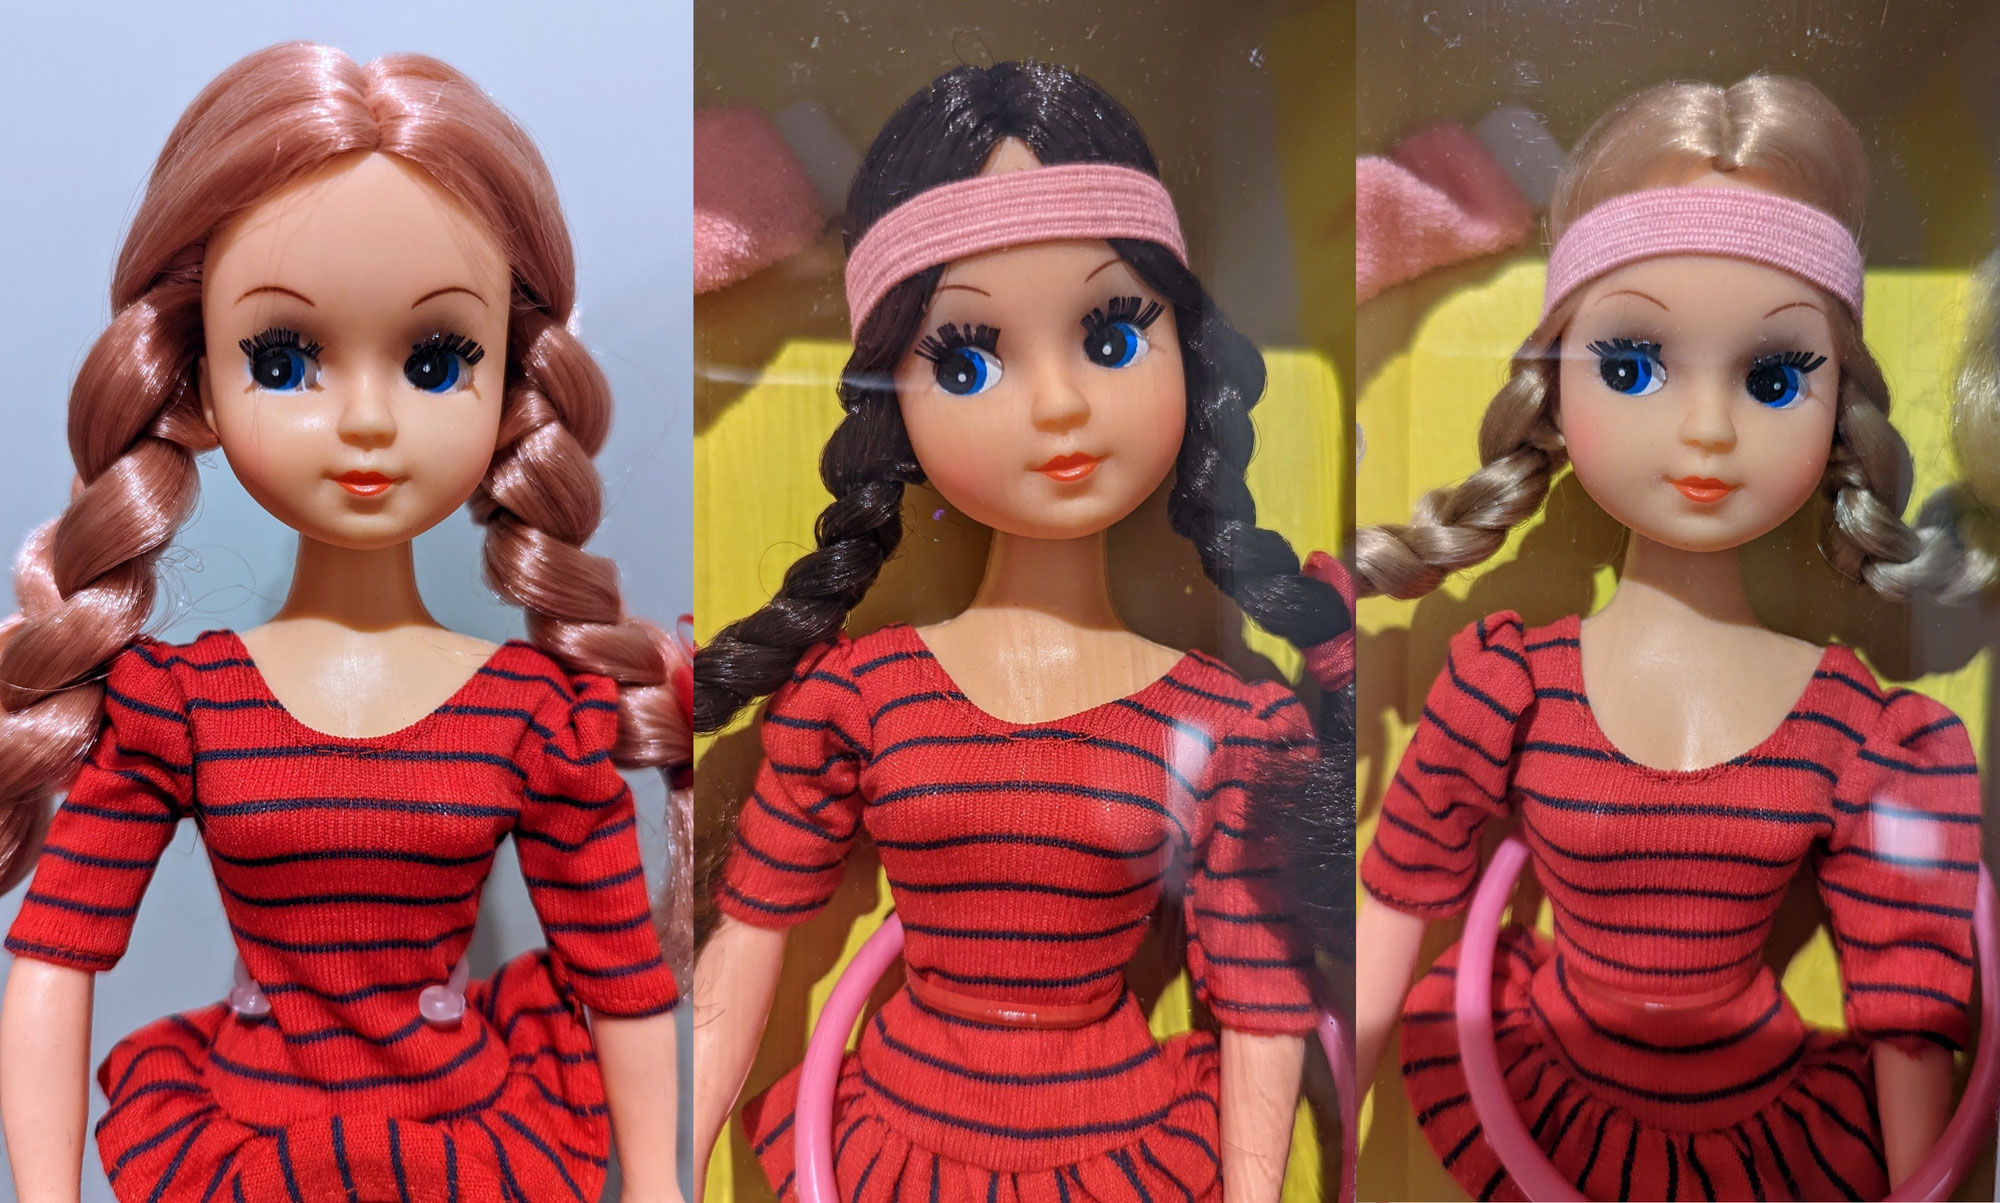 Fleur doll variants - Part 2: 1983 and 1984